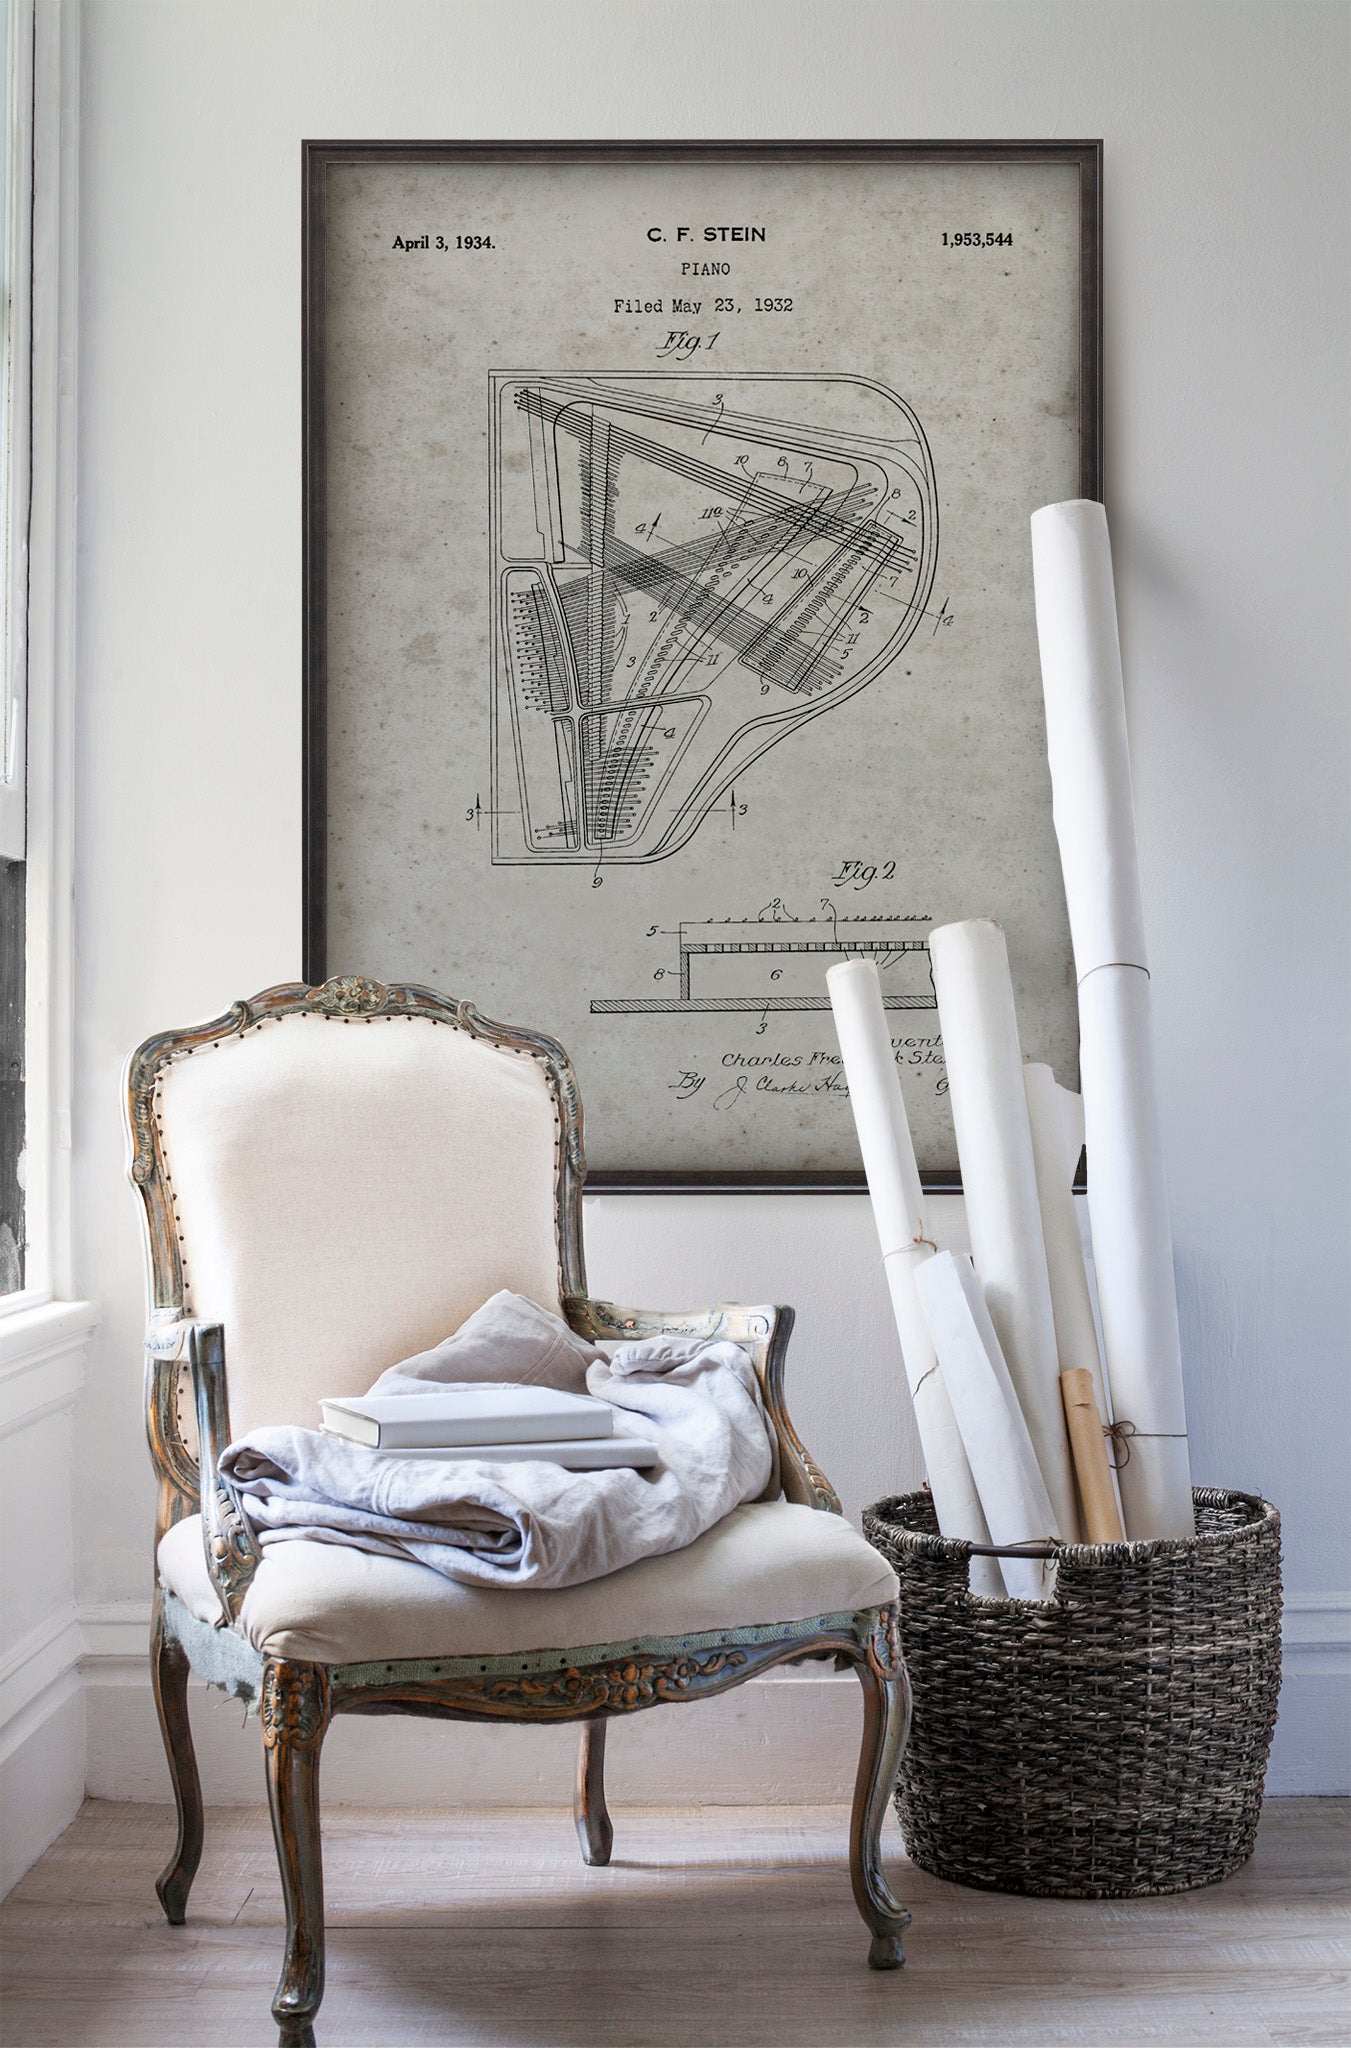 Piano Stein Patent print art in room with white walls with vintage furniture and vintage decor.